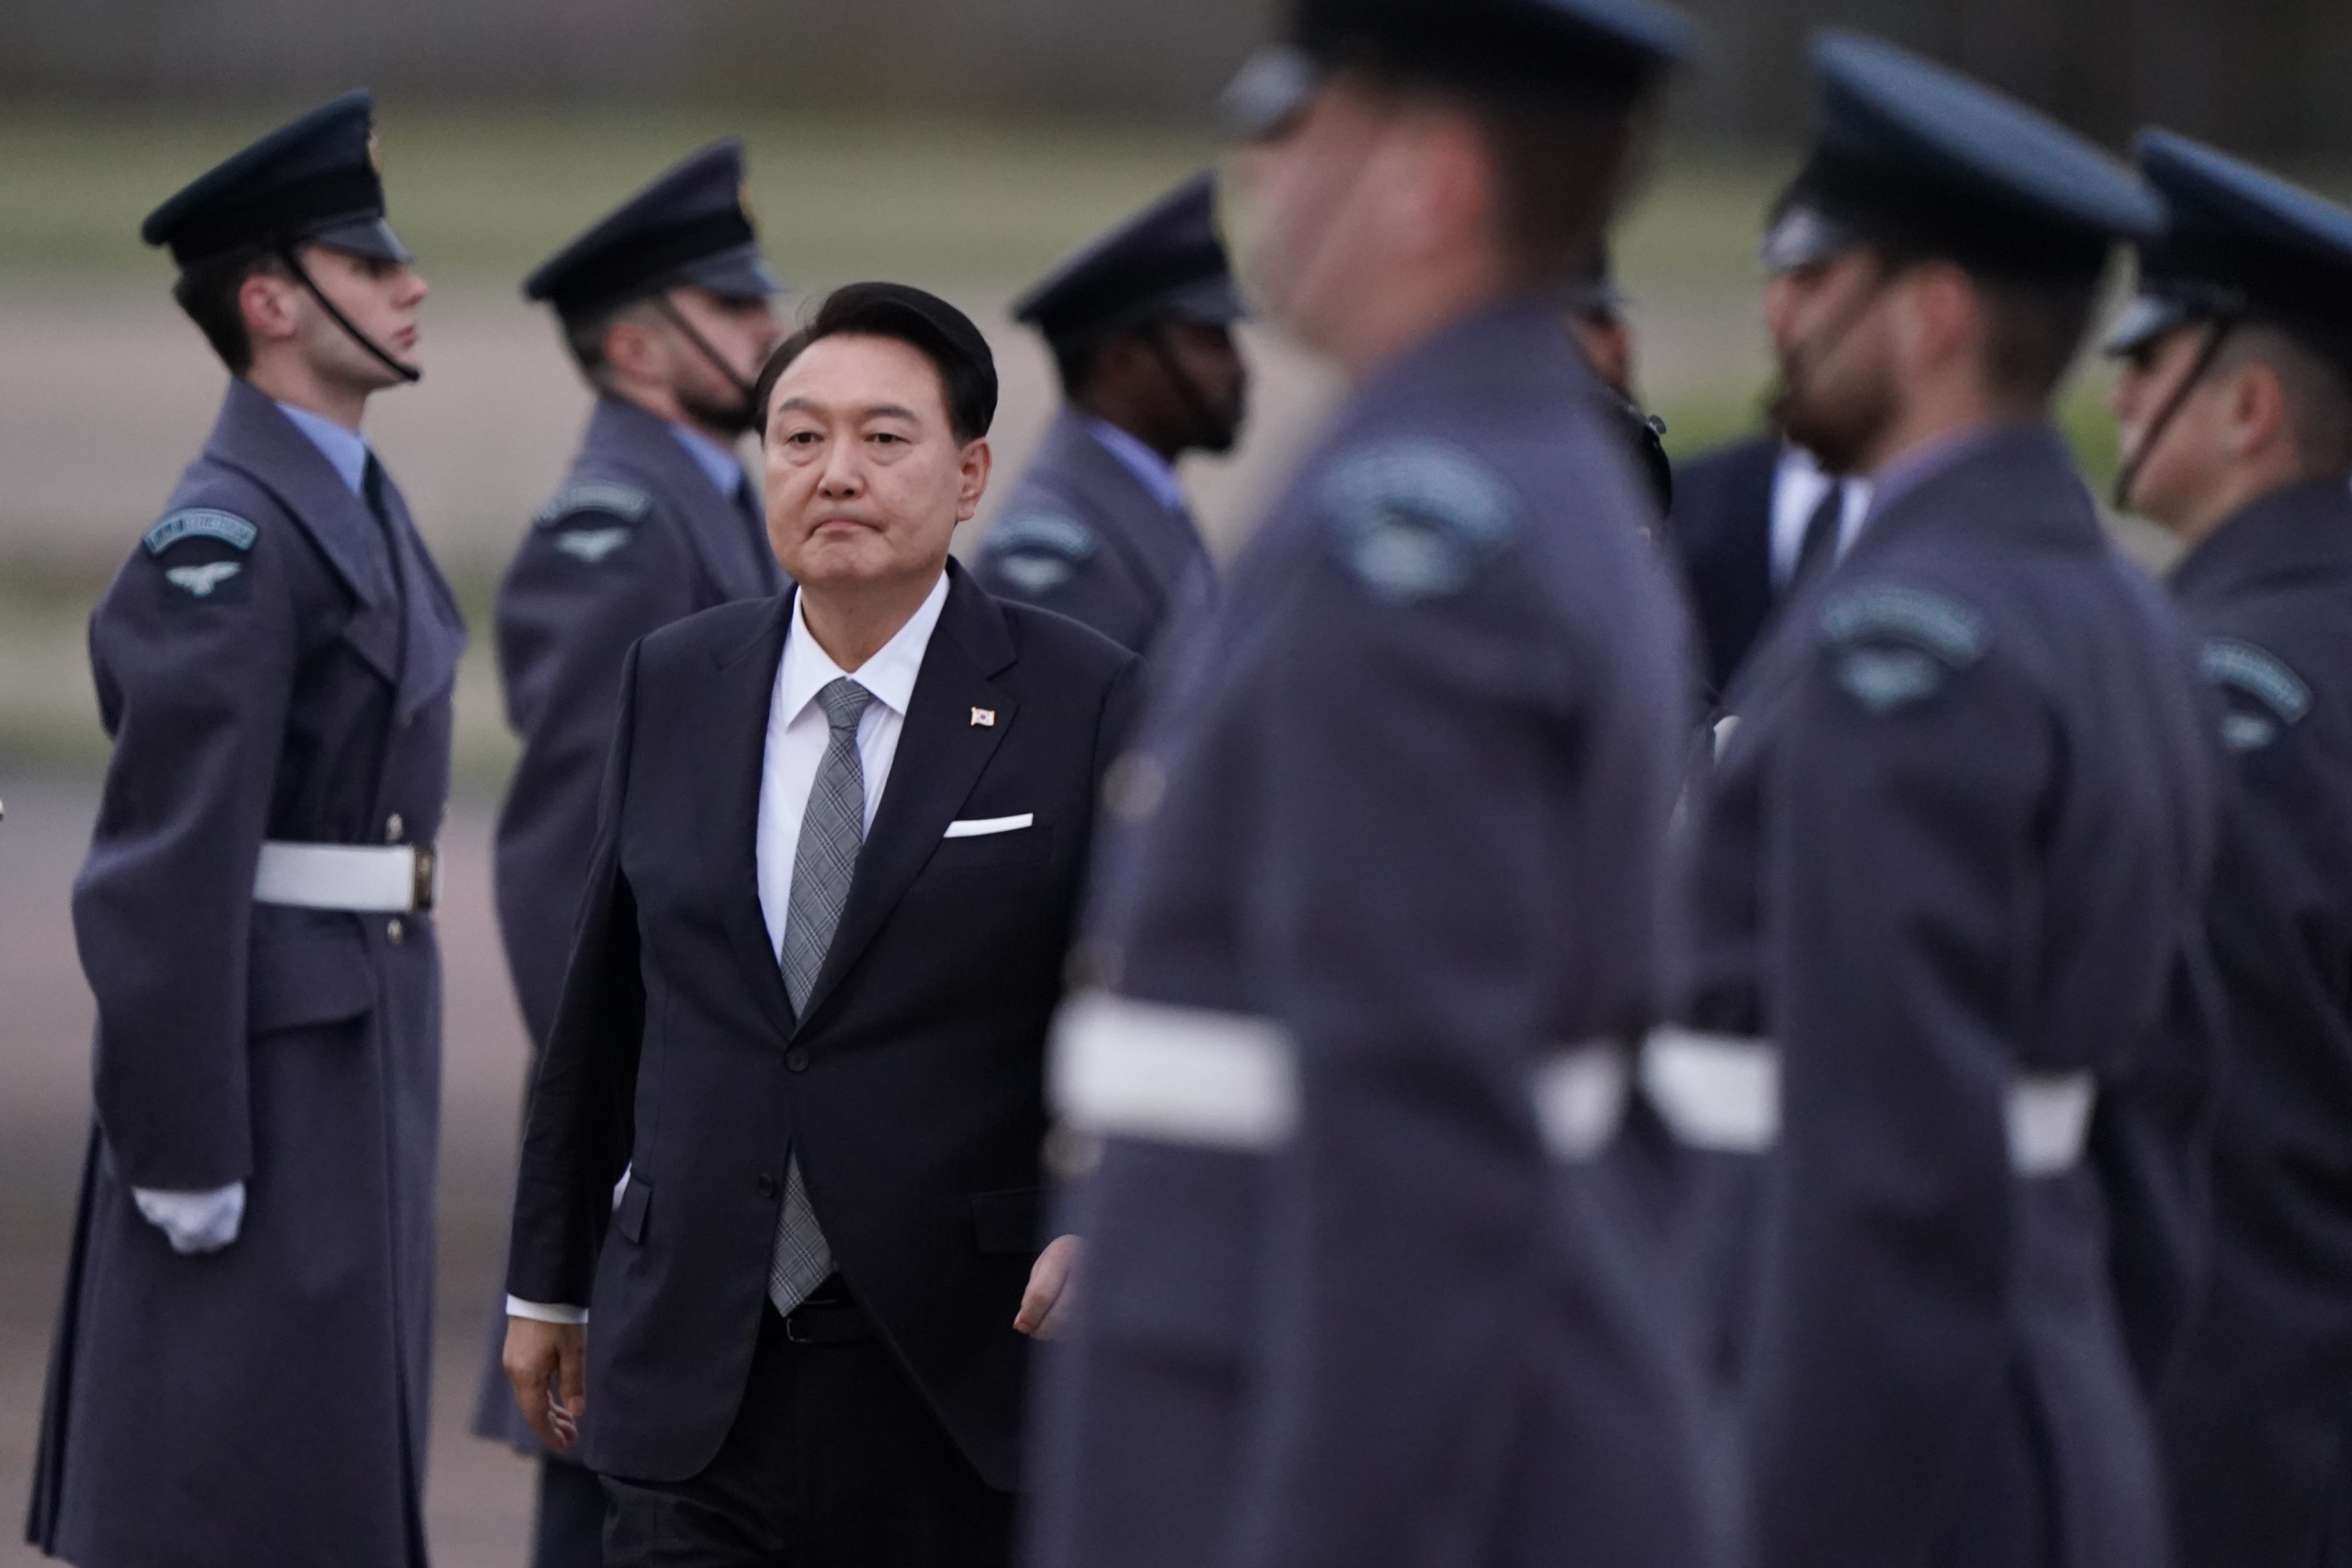 South Korea’s President Yoon Suk-yeol arrives at Stansted Airport for the start of his state visit to the UK. Yoon said he believed China’s interests did not align with those of the North or Russia, stressing Beijing’s role in promoting peace and prosperity in the region. Photo: dpa